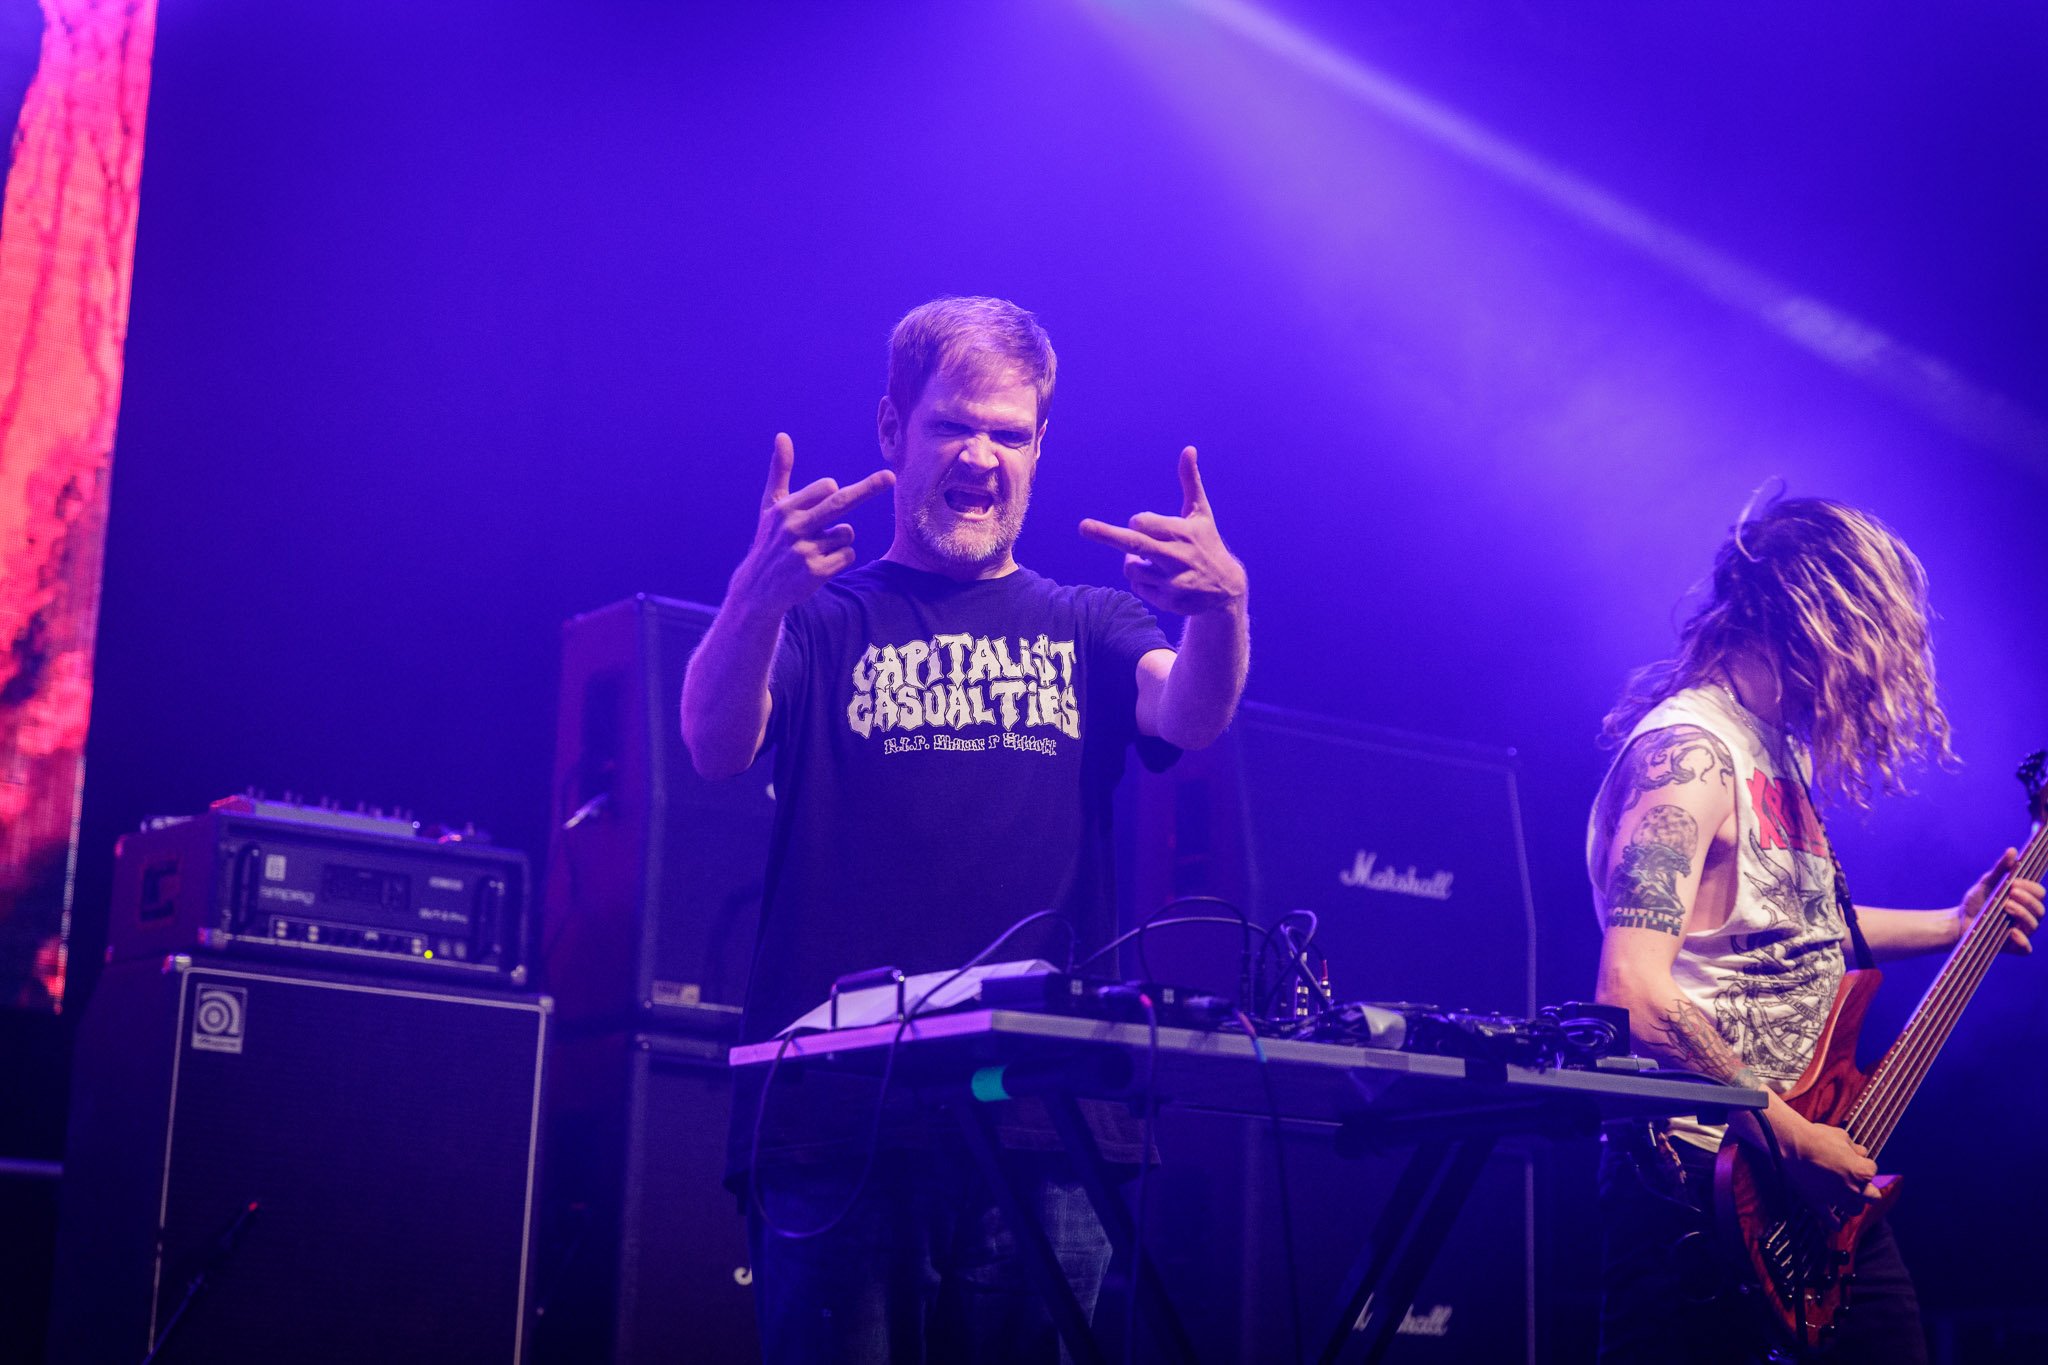 Pig Destroyer at the Damnation Festival in Manchester on Novembe